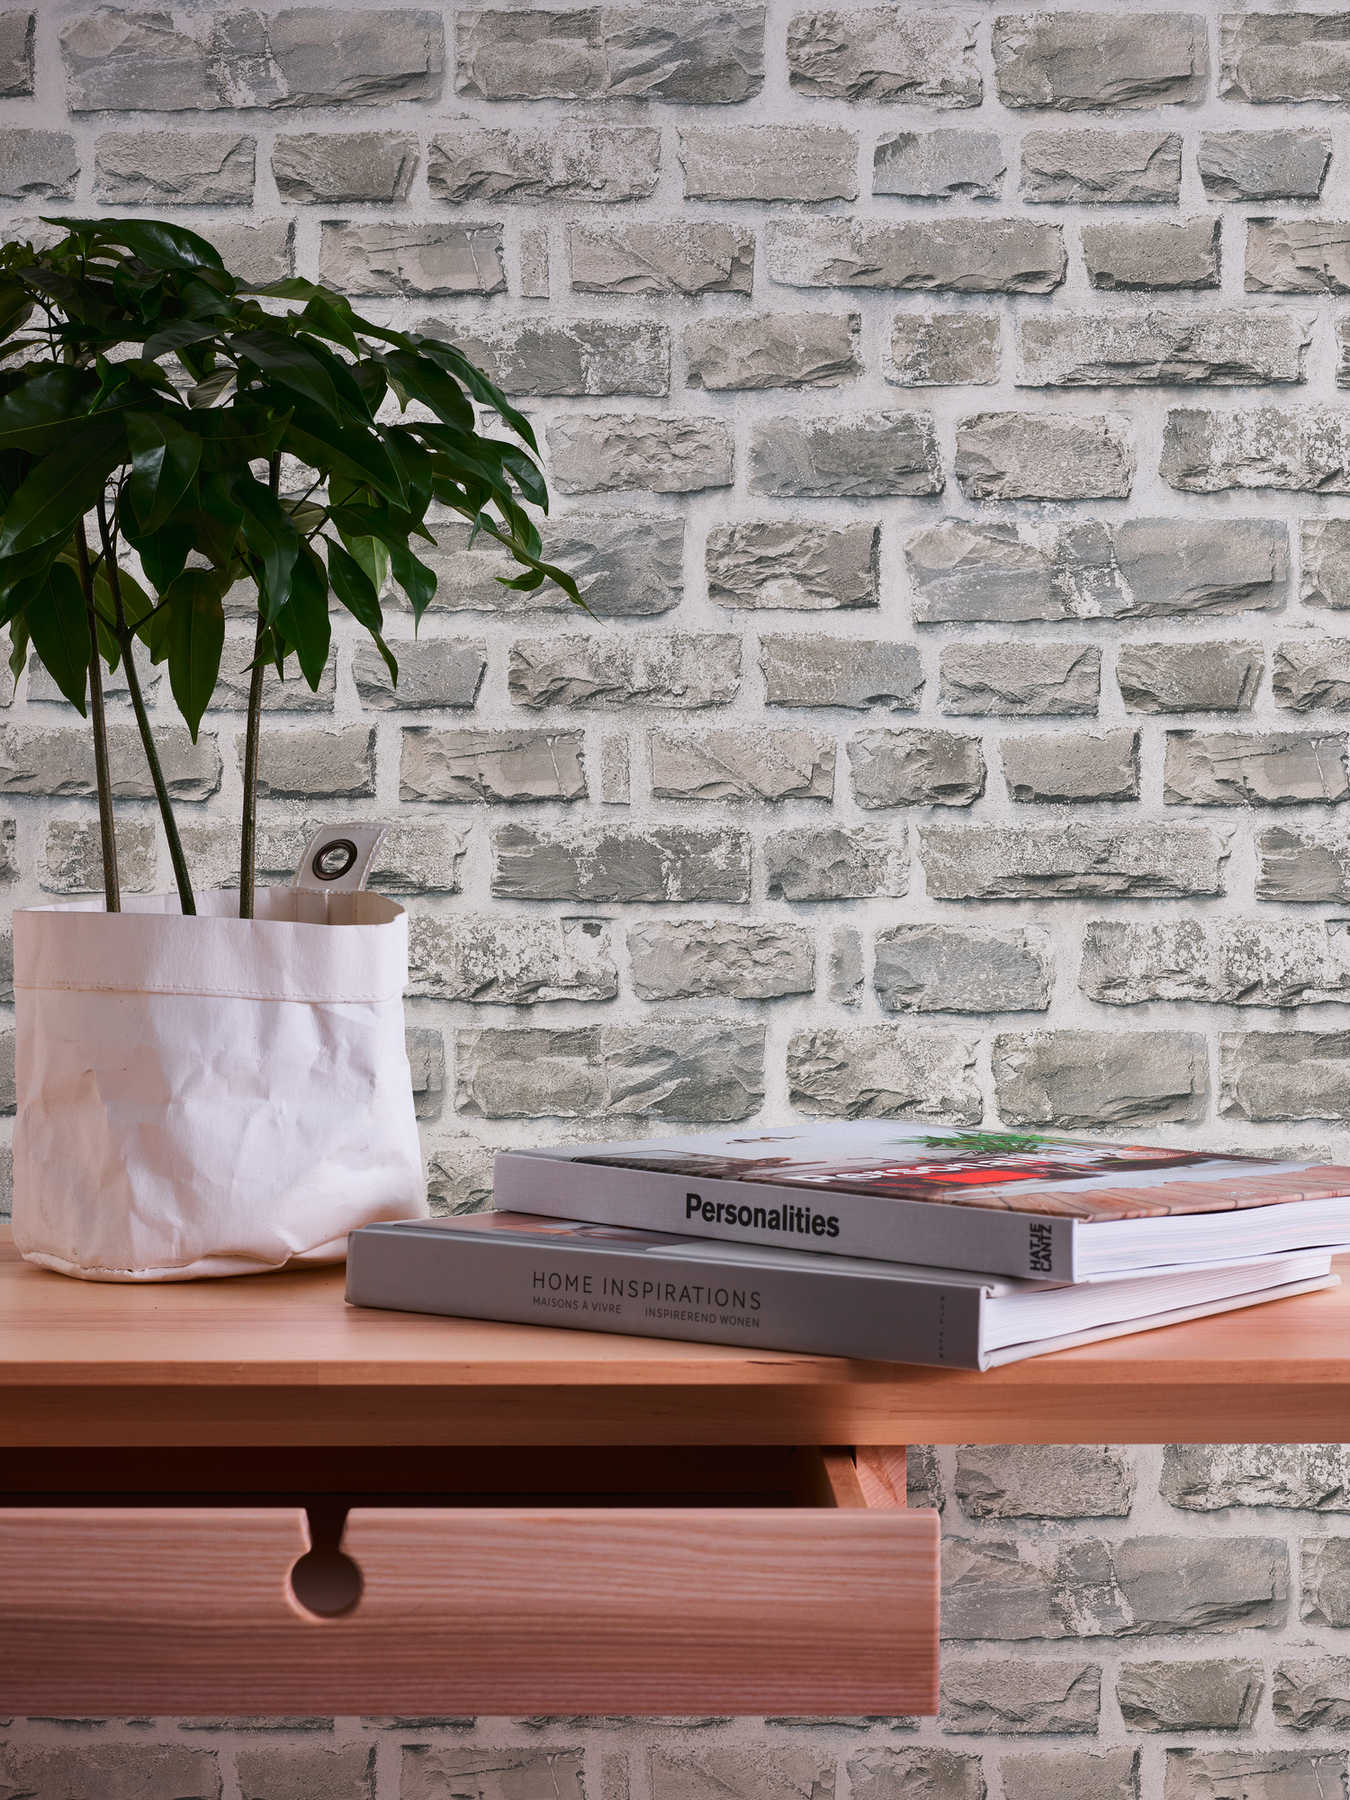             Wallpaper in stone look with quarry stones, natural stone - beige, grey
        